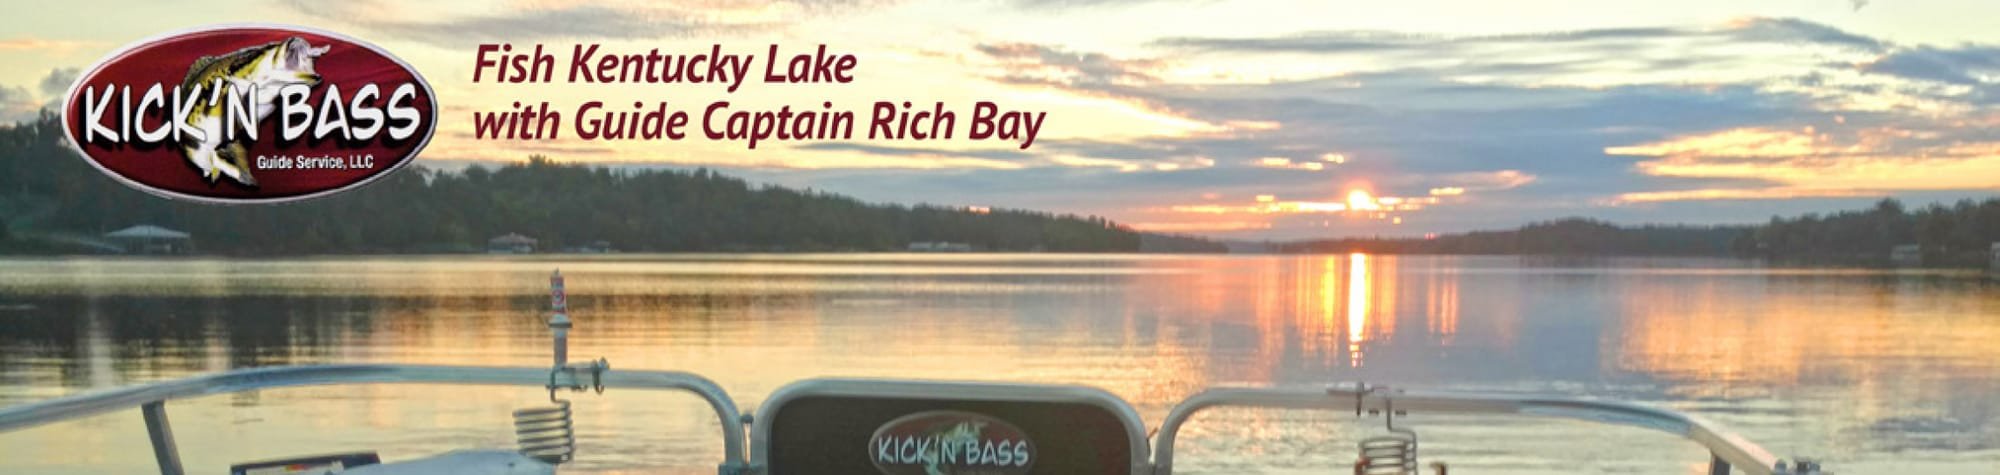 Your Kick'n Bass Fishing Report for April 3, 2021